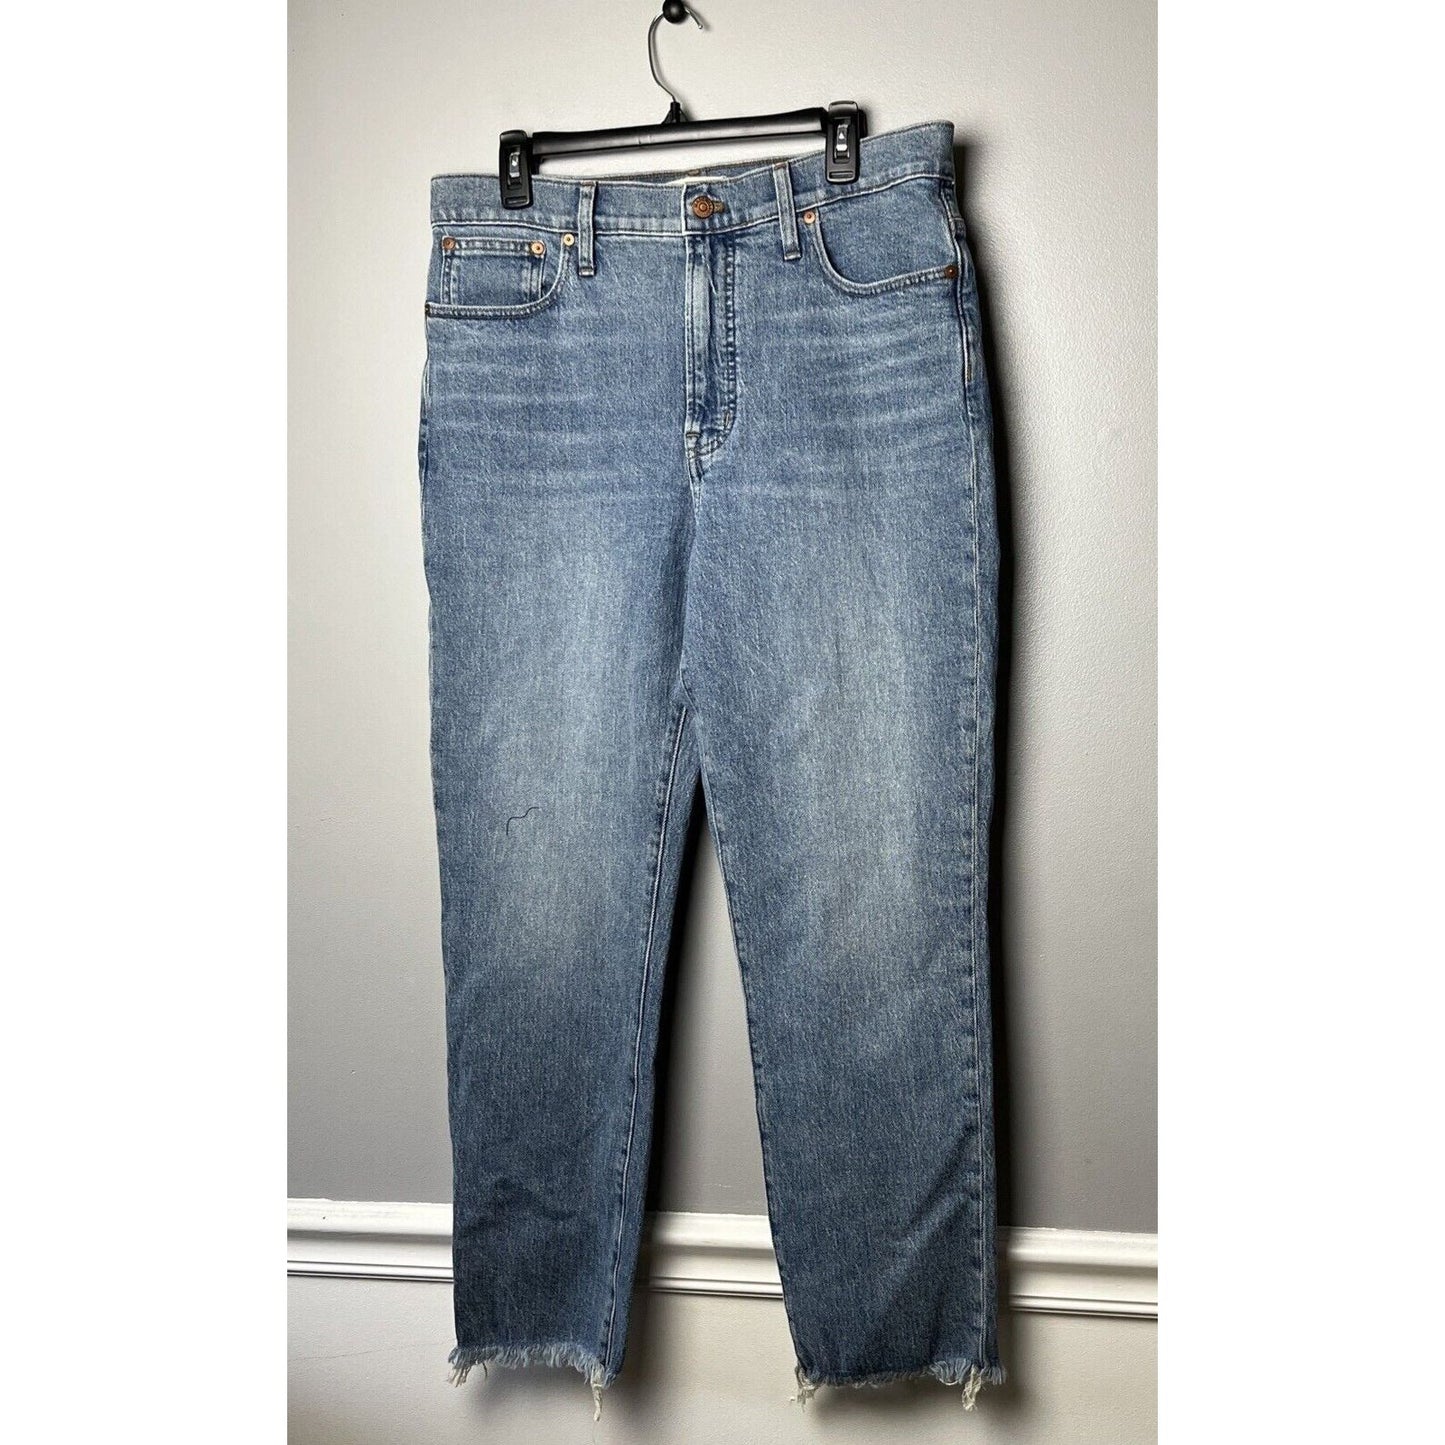 Madewell The Perfect Vintage Jean in Ainsworth Wash Size 31